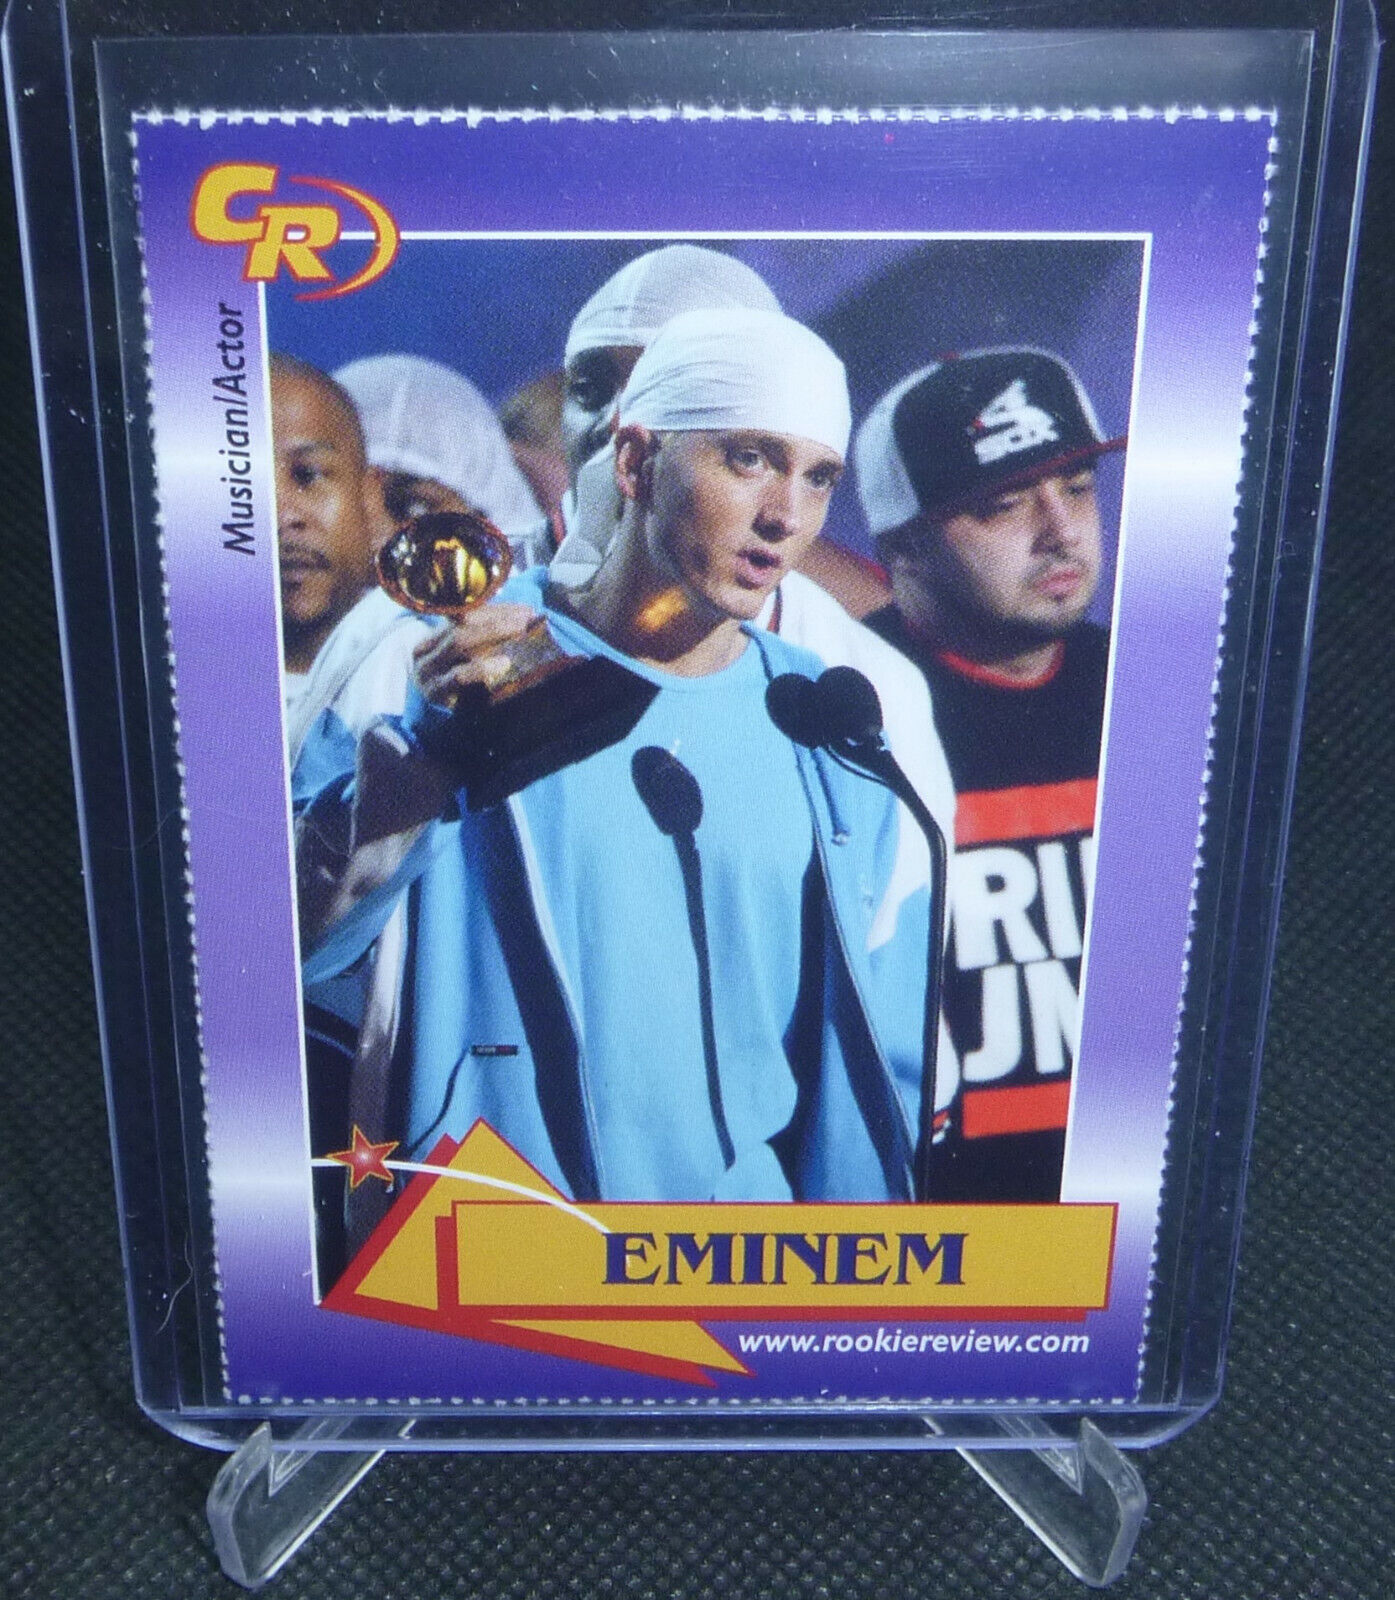 2003 Celebrity Review Rookie Review EMINEM Musician/Actor Card #3